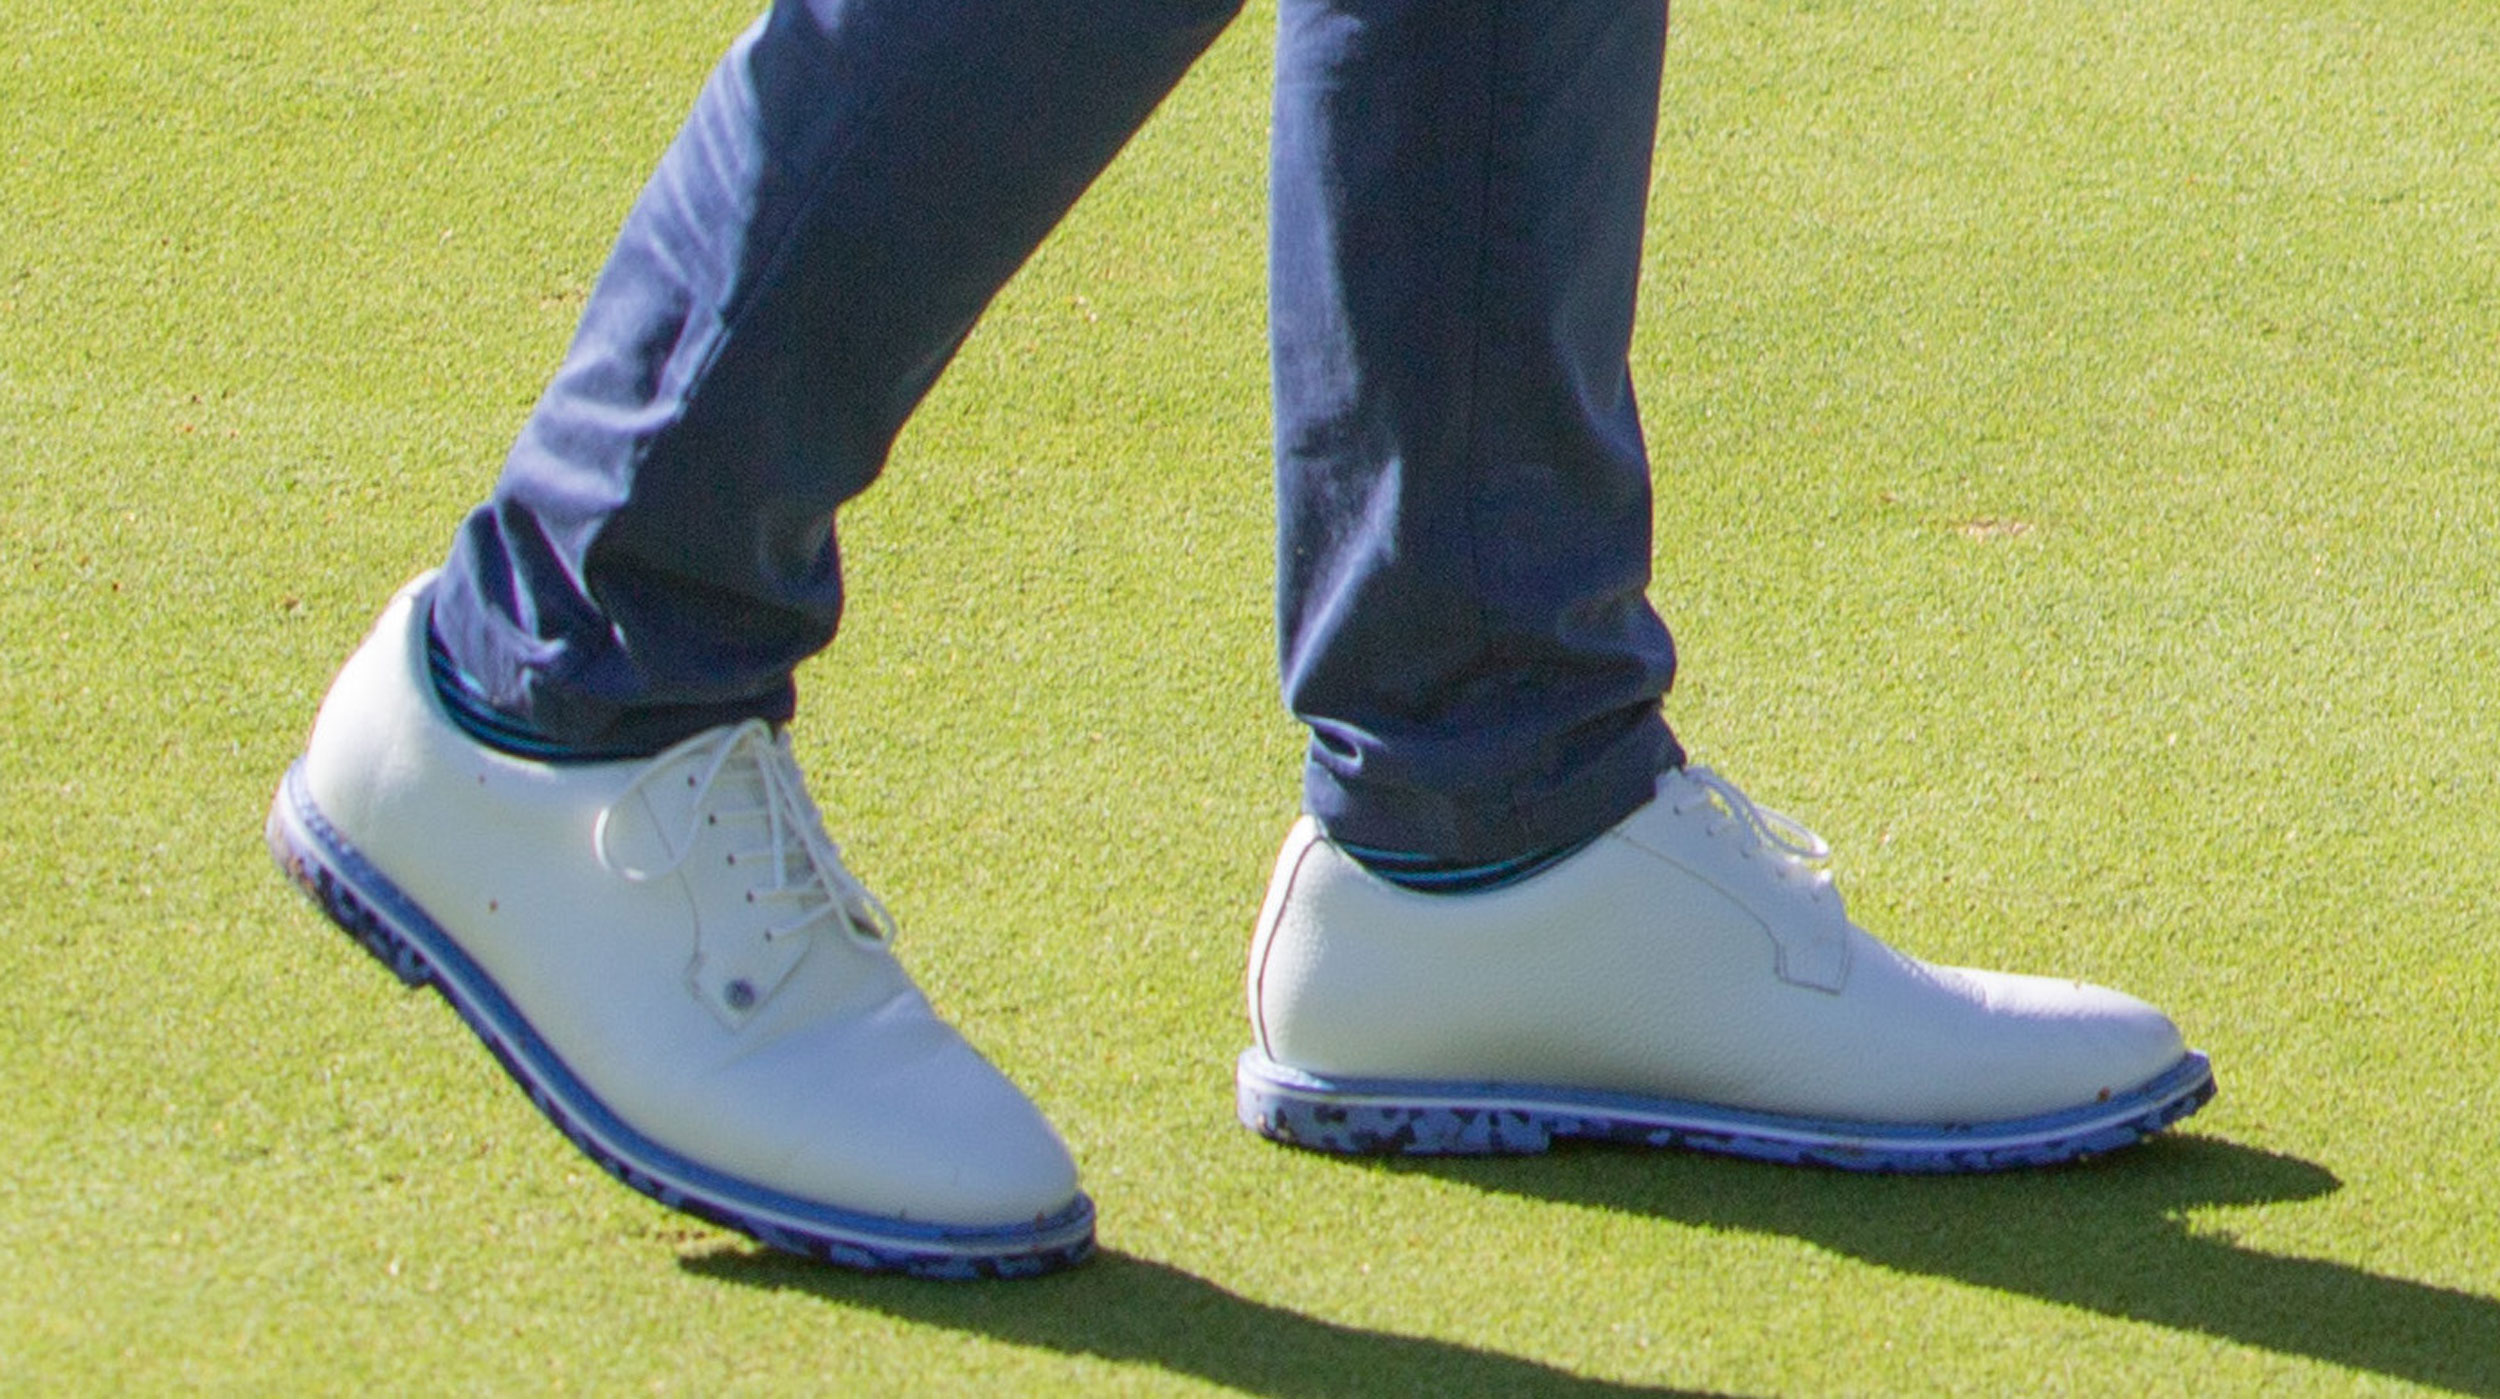 G/FORE MG4X2 Golf Shoe Review - Plugged In Golf